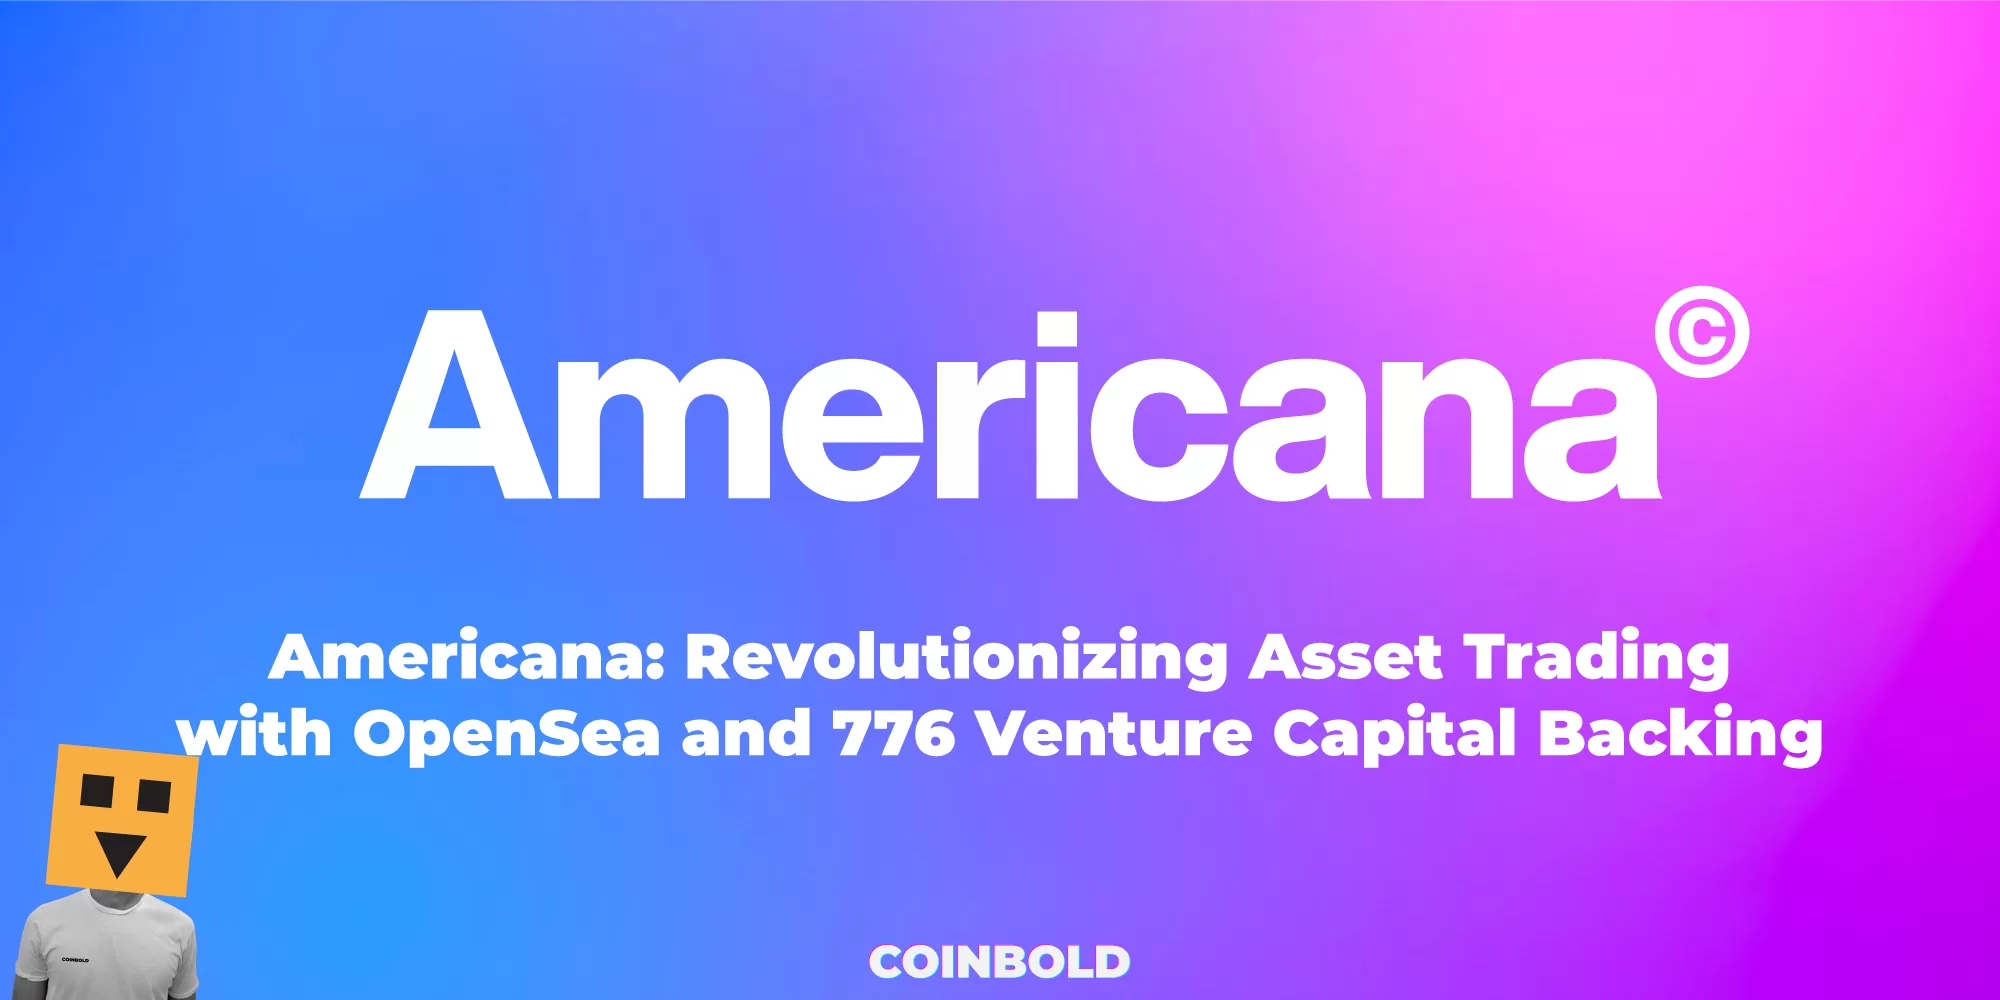 Americana: Revolutionizing Asset Trading with OpenSea and 776 Venture Capital Backing